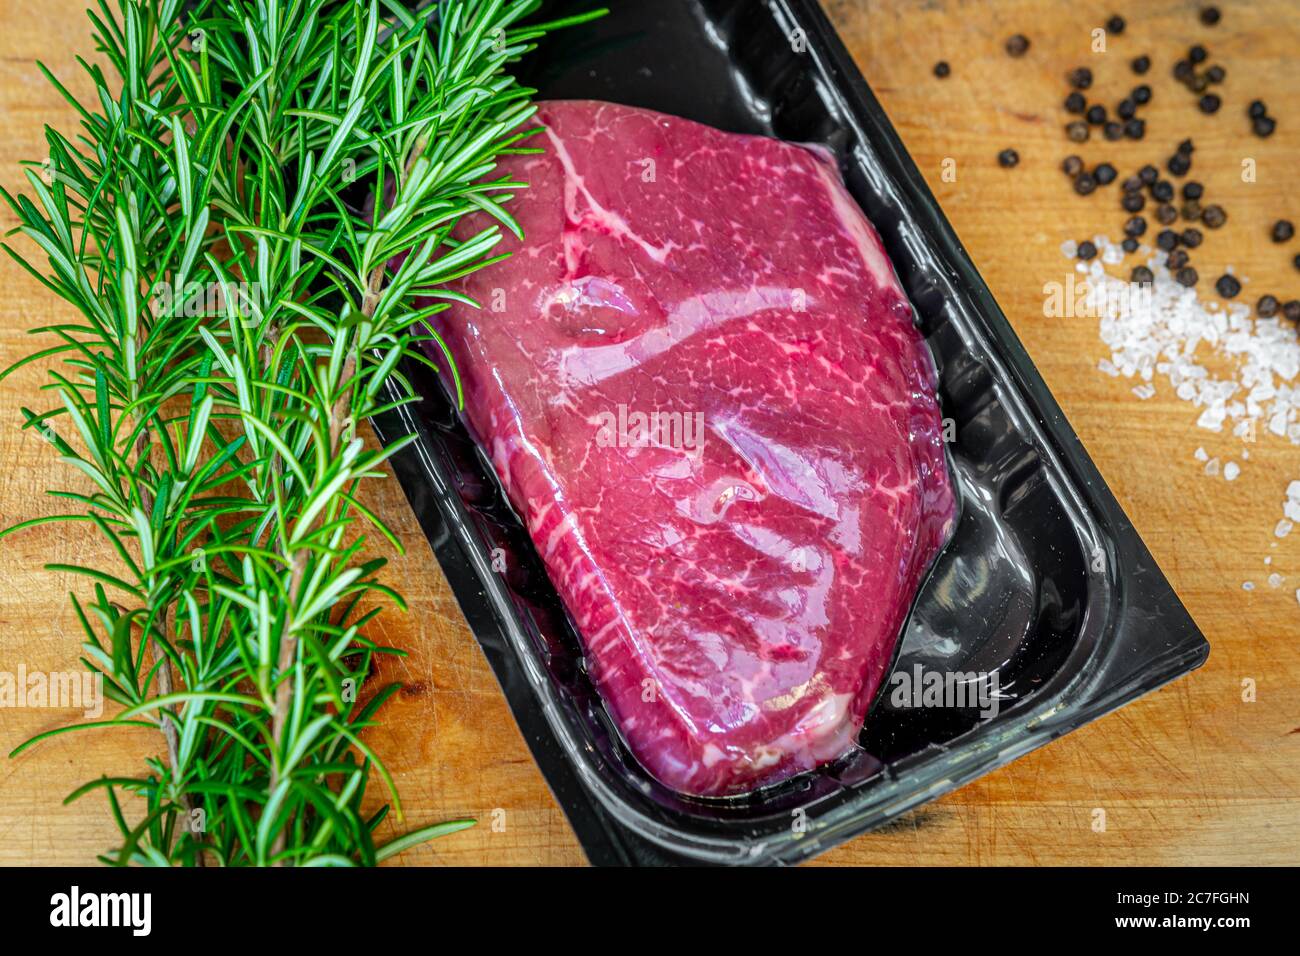 Beef steak in vacuum skin packaging and spices on wooden chopping board Stock Photo